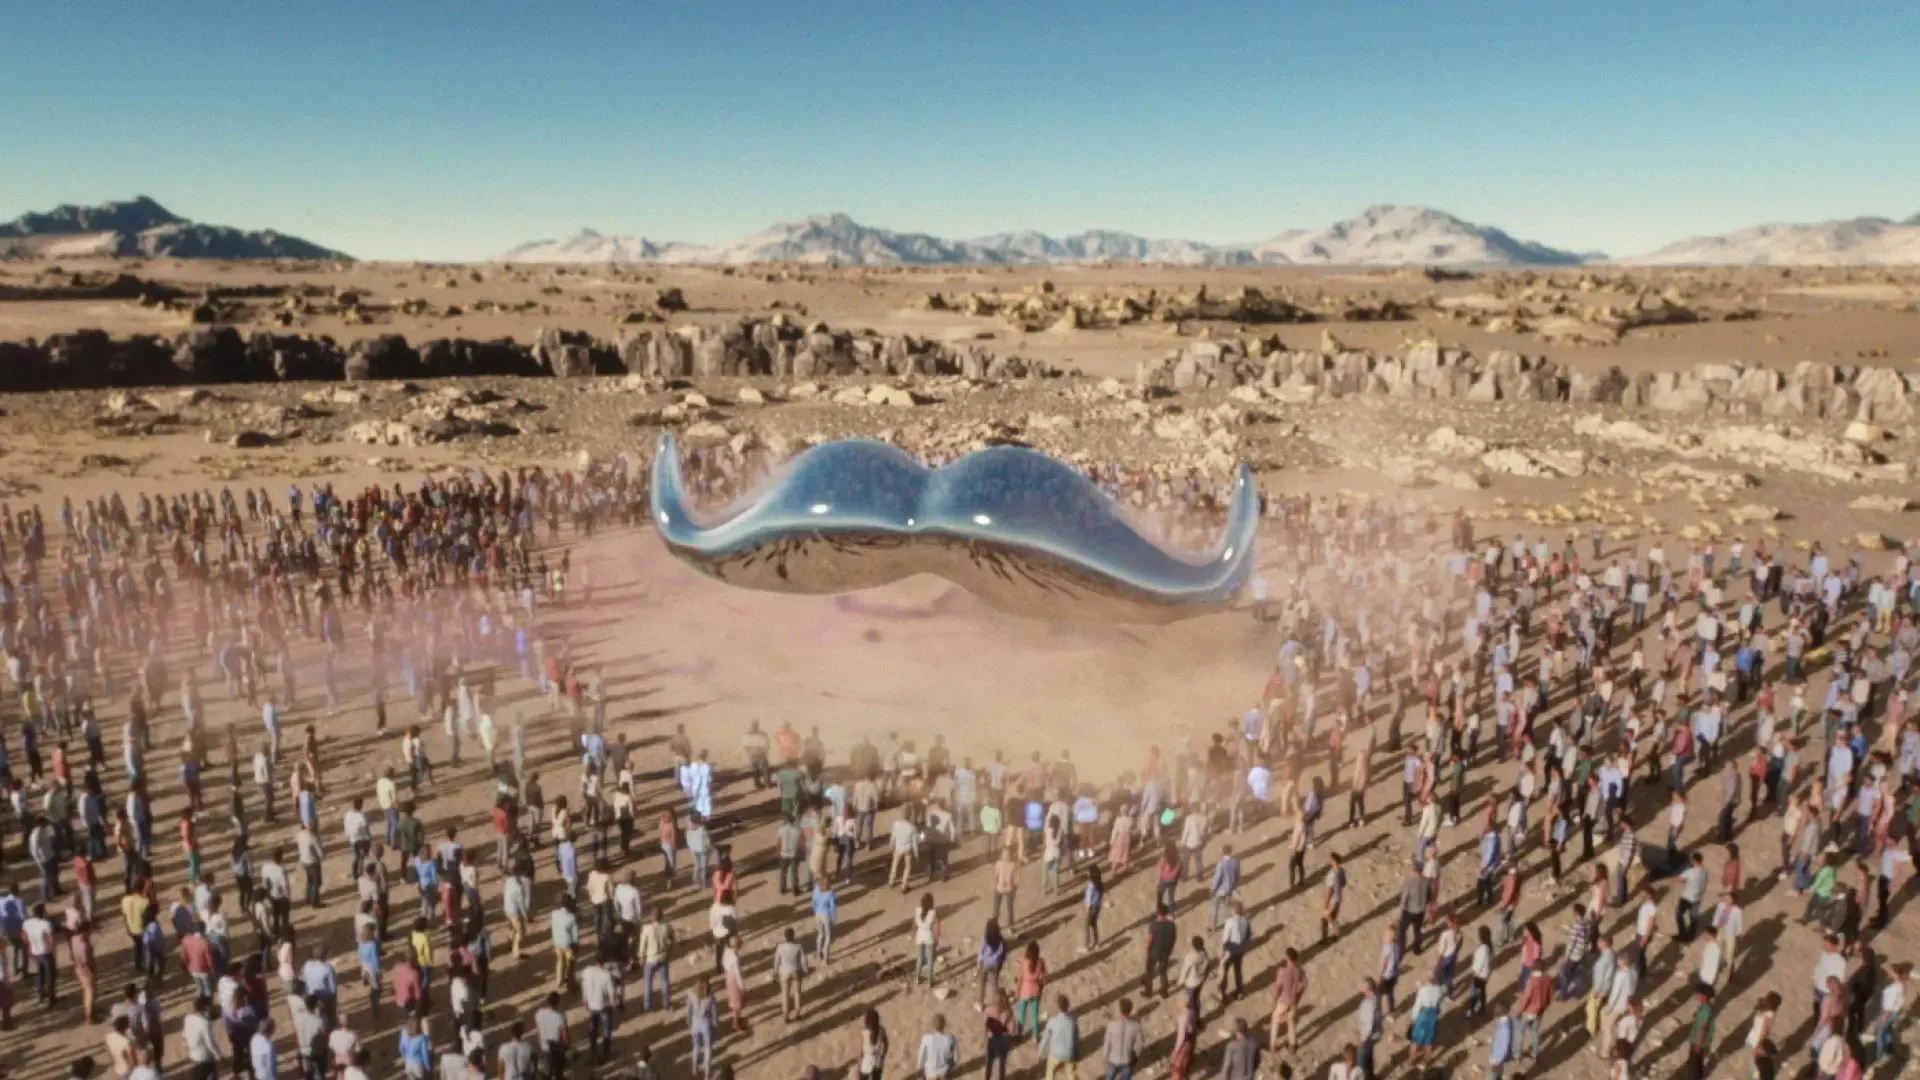 Image of giant metallic moustache, descended from the sky, near an assembled throng of people.